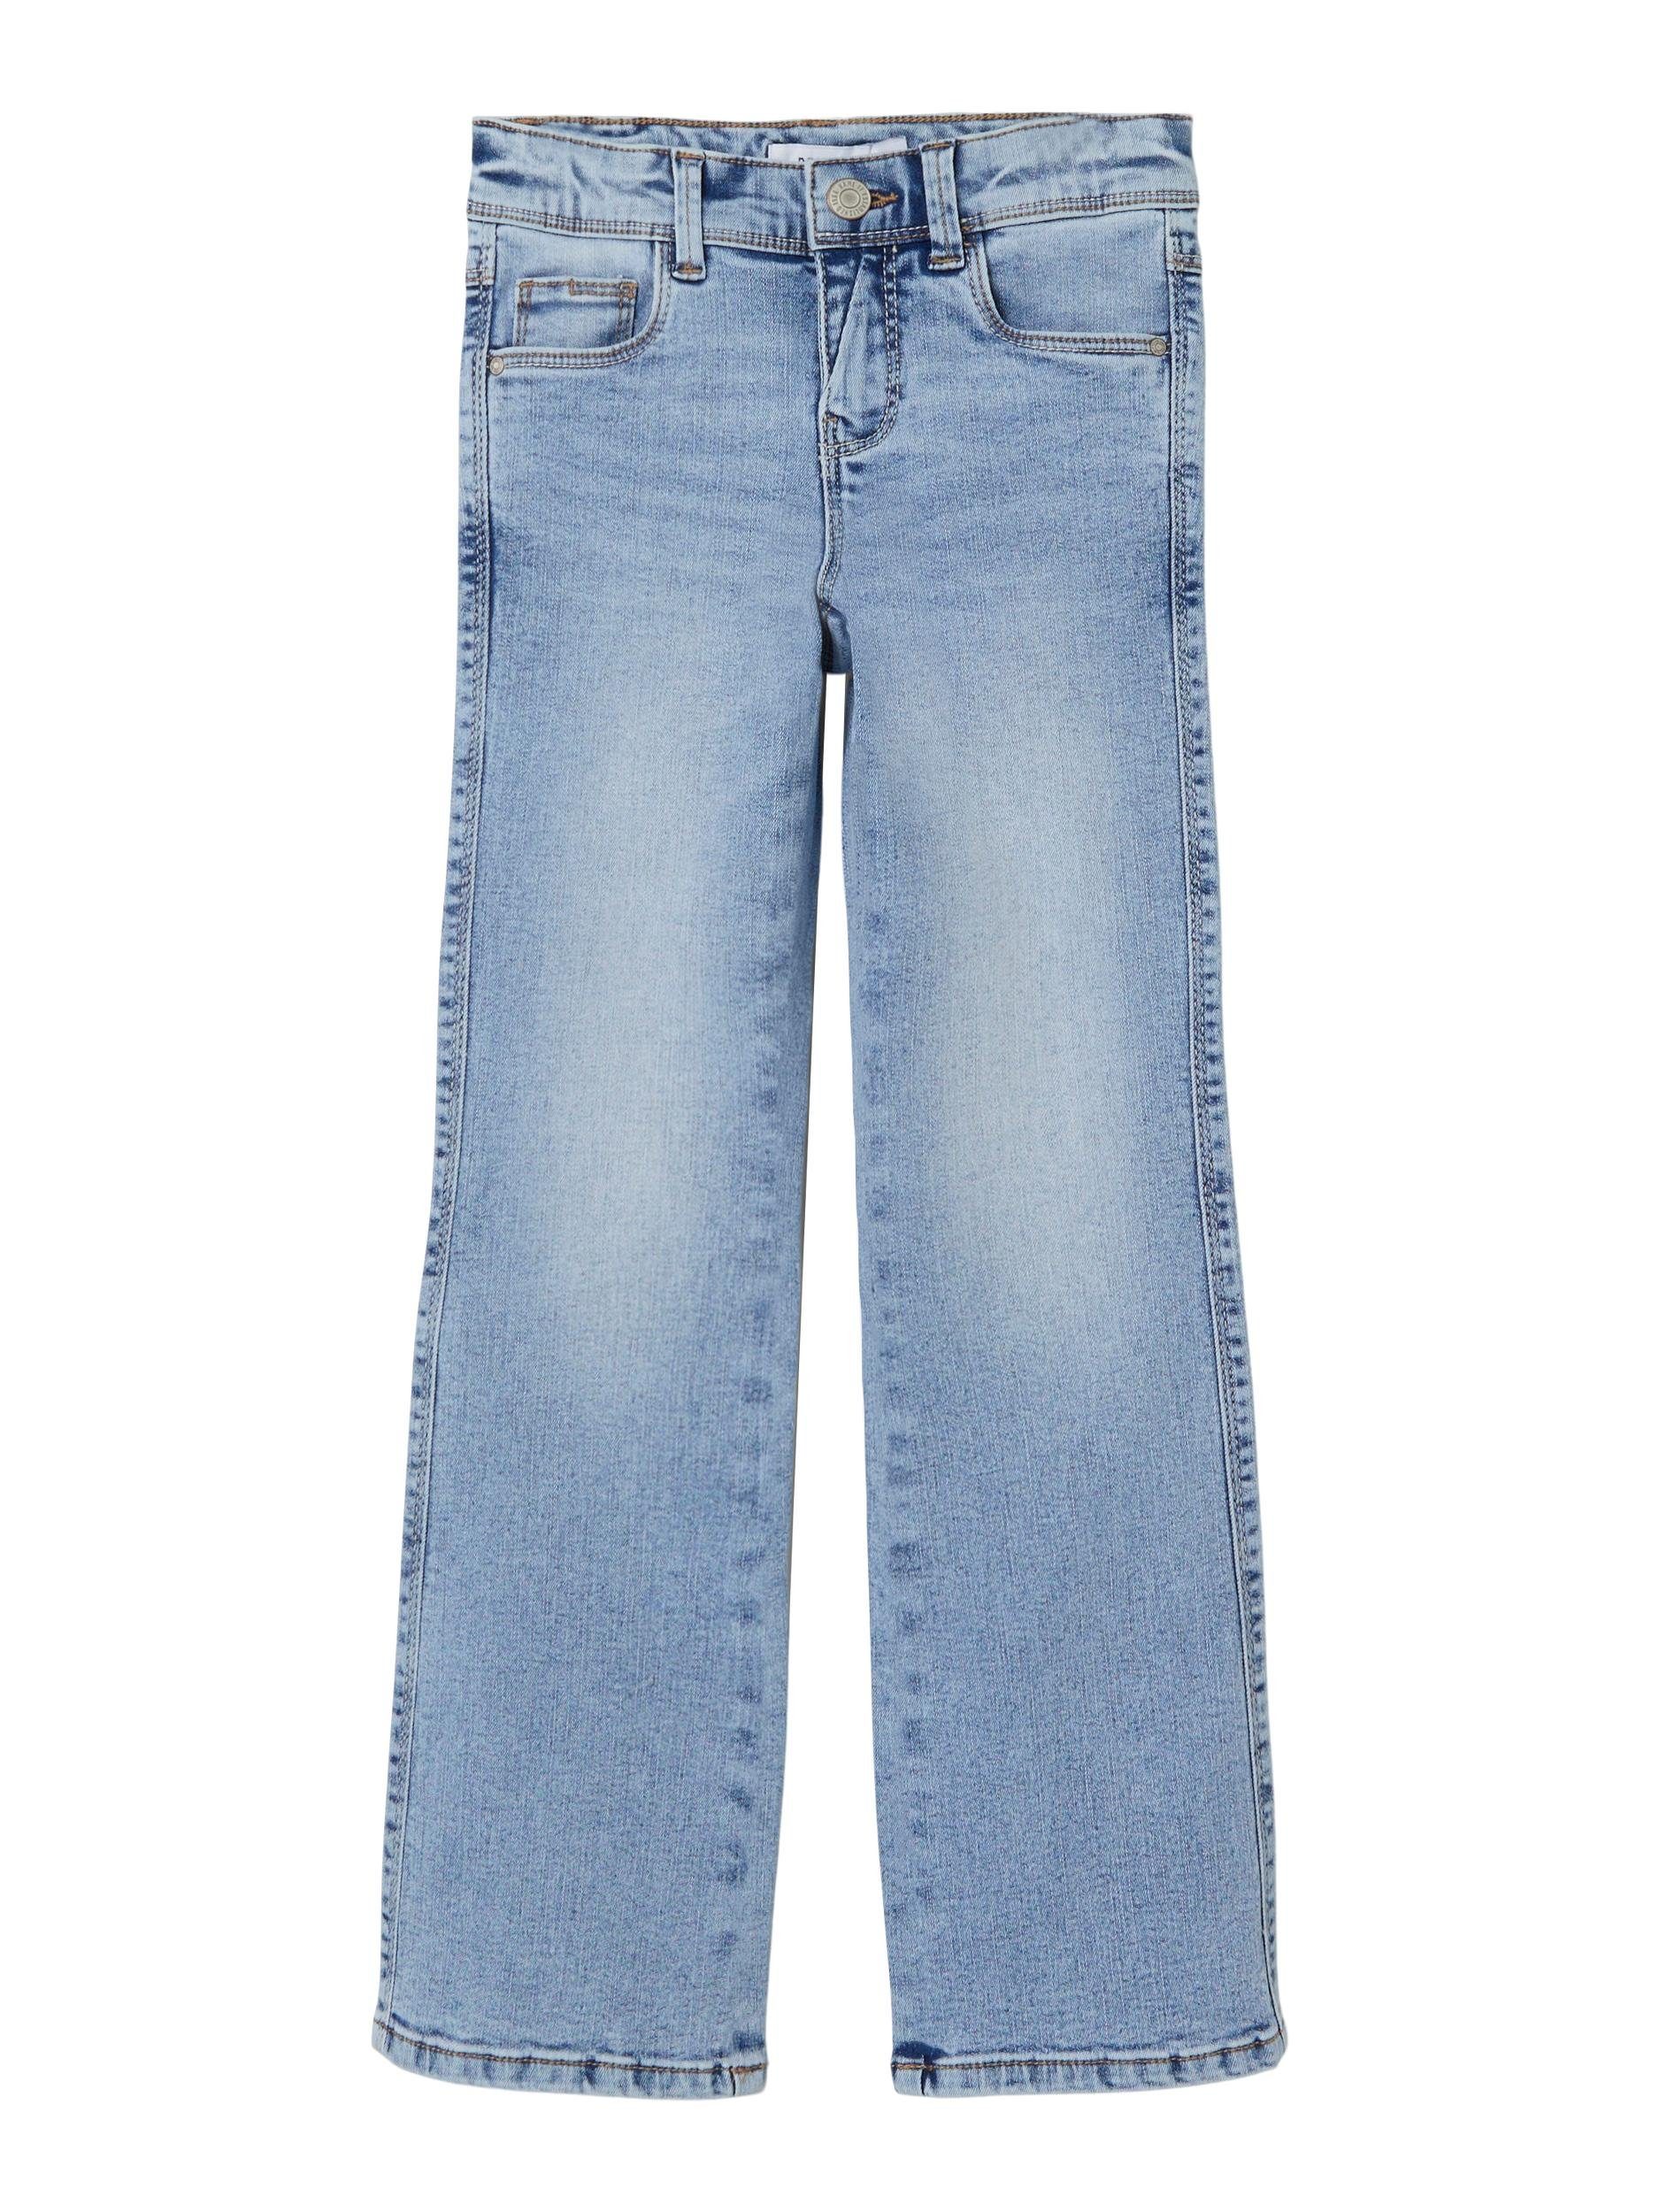 Denim JEANS Light 1142-AU Bootcut-Jeans NOOS SKINNY Stretch Name mit BOOT Blue It NKFPOLLY